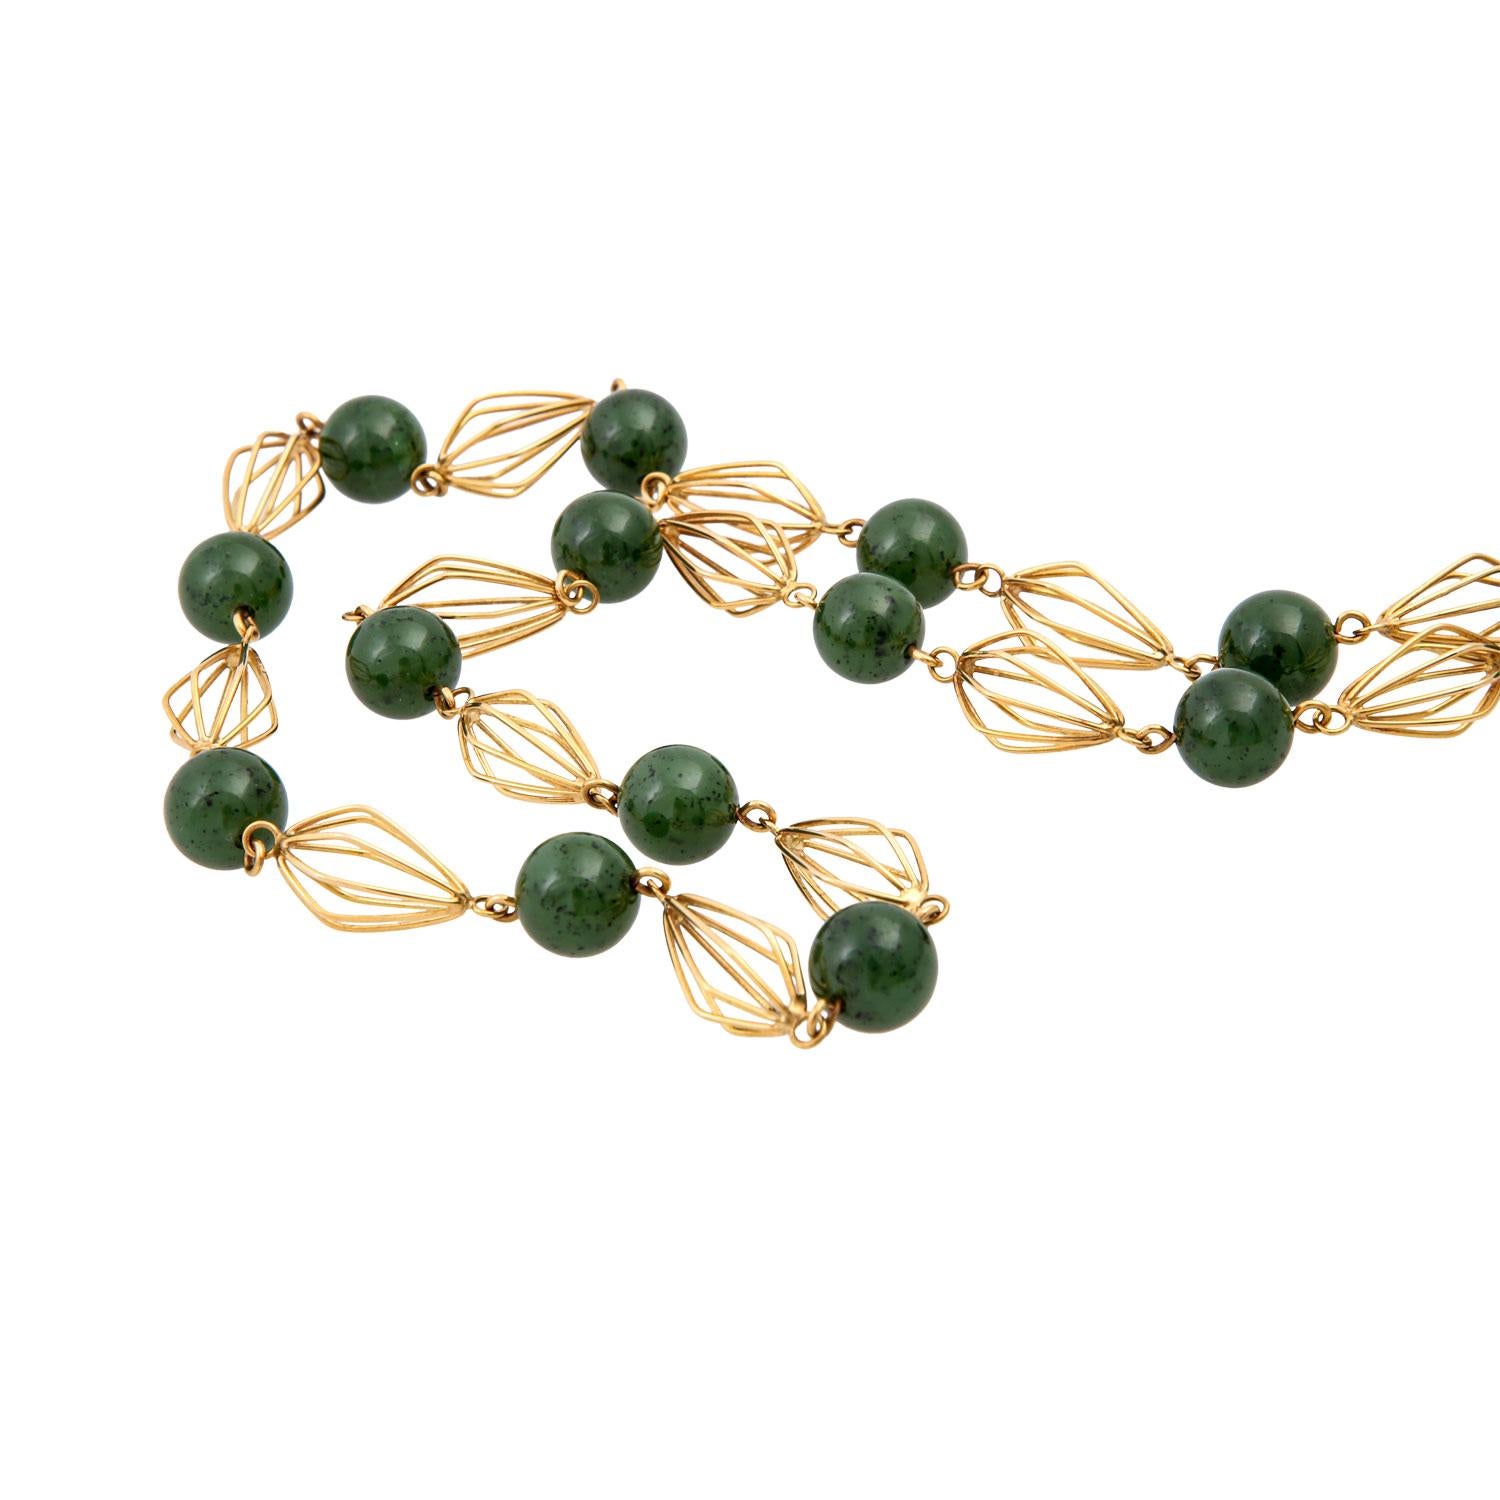 Women's Chain set with 15 jade beads. For Sale